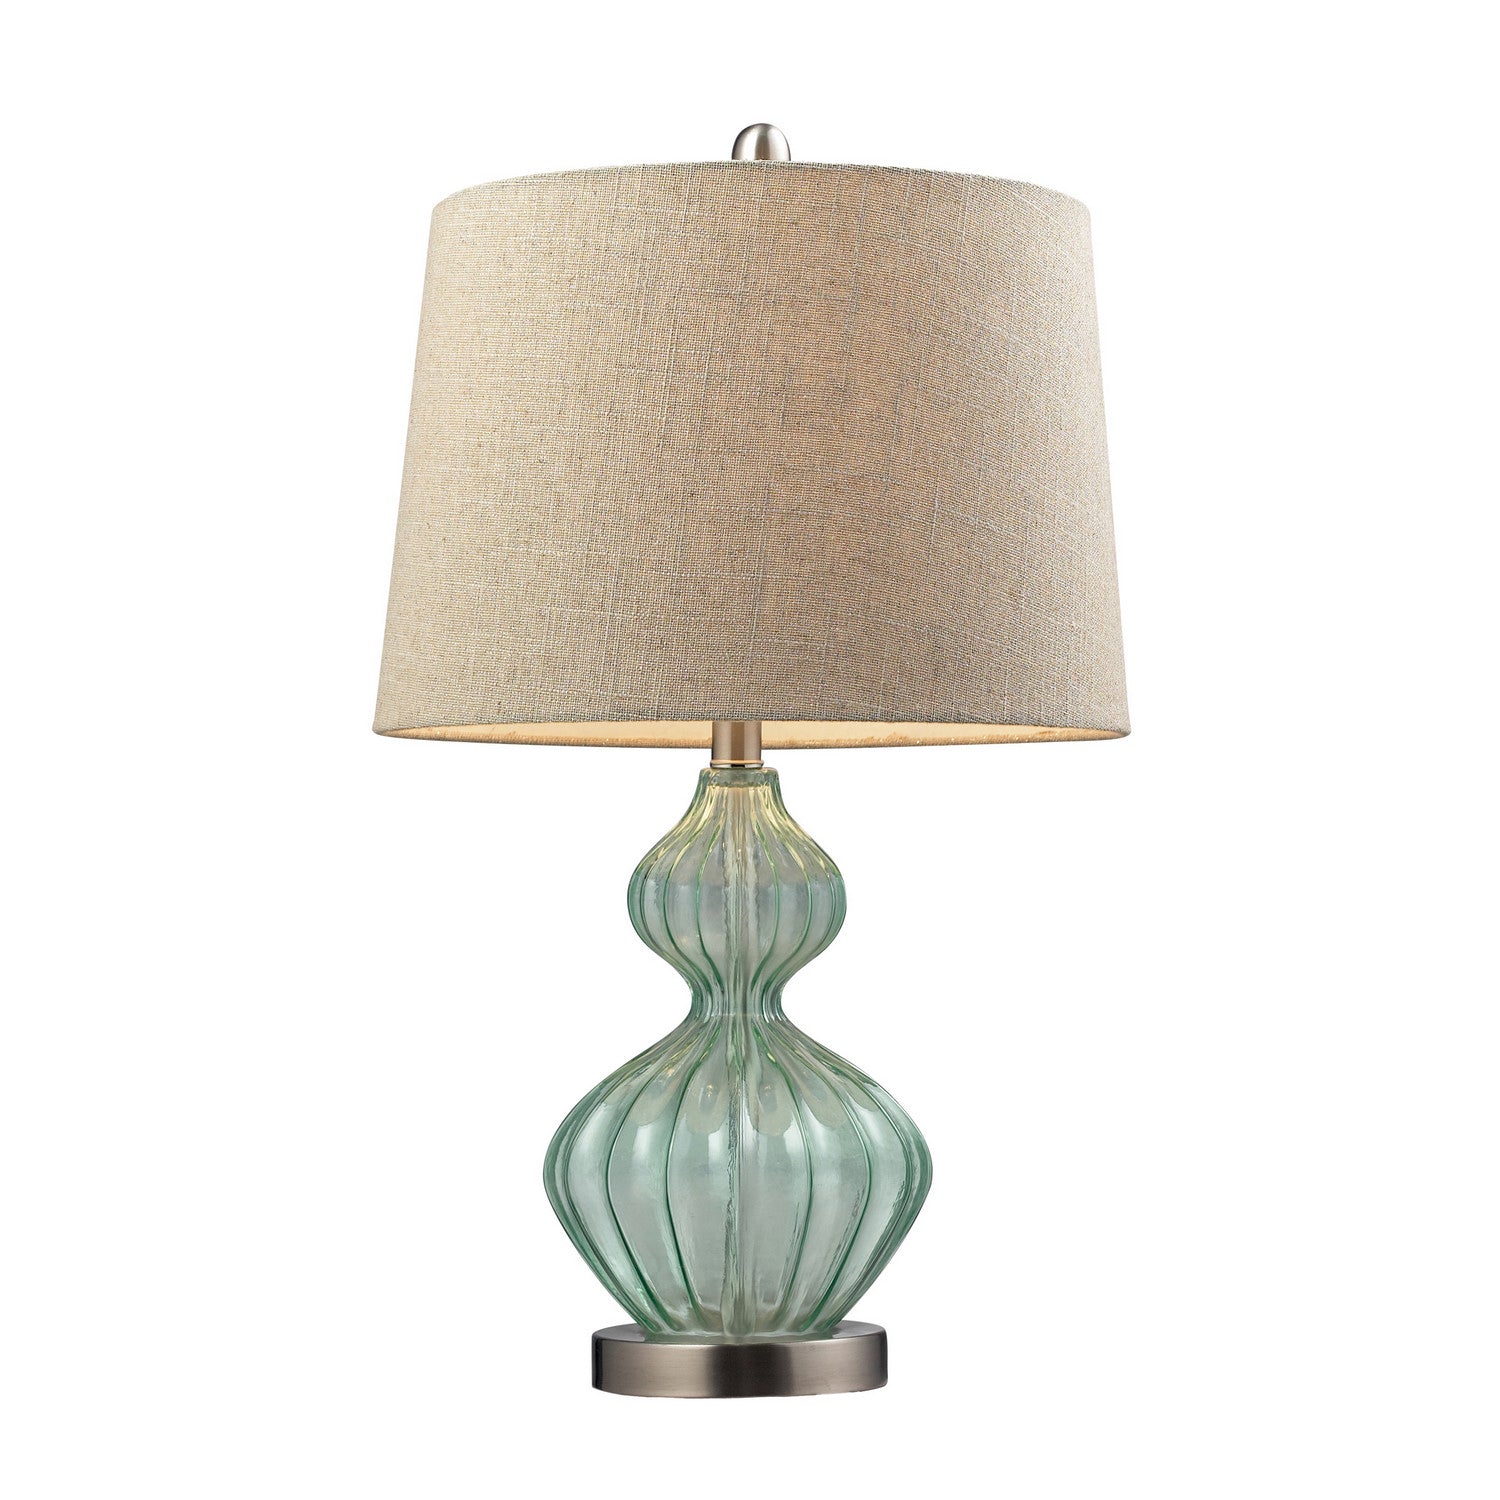 ELK Home - D141 - One Light Table Lamp - Smoked Glass - Green